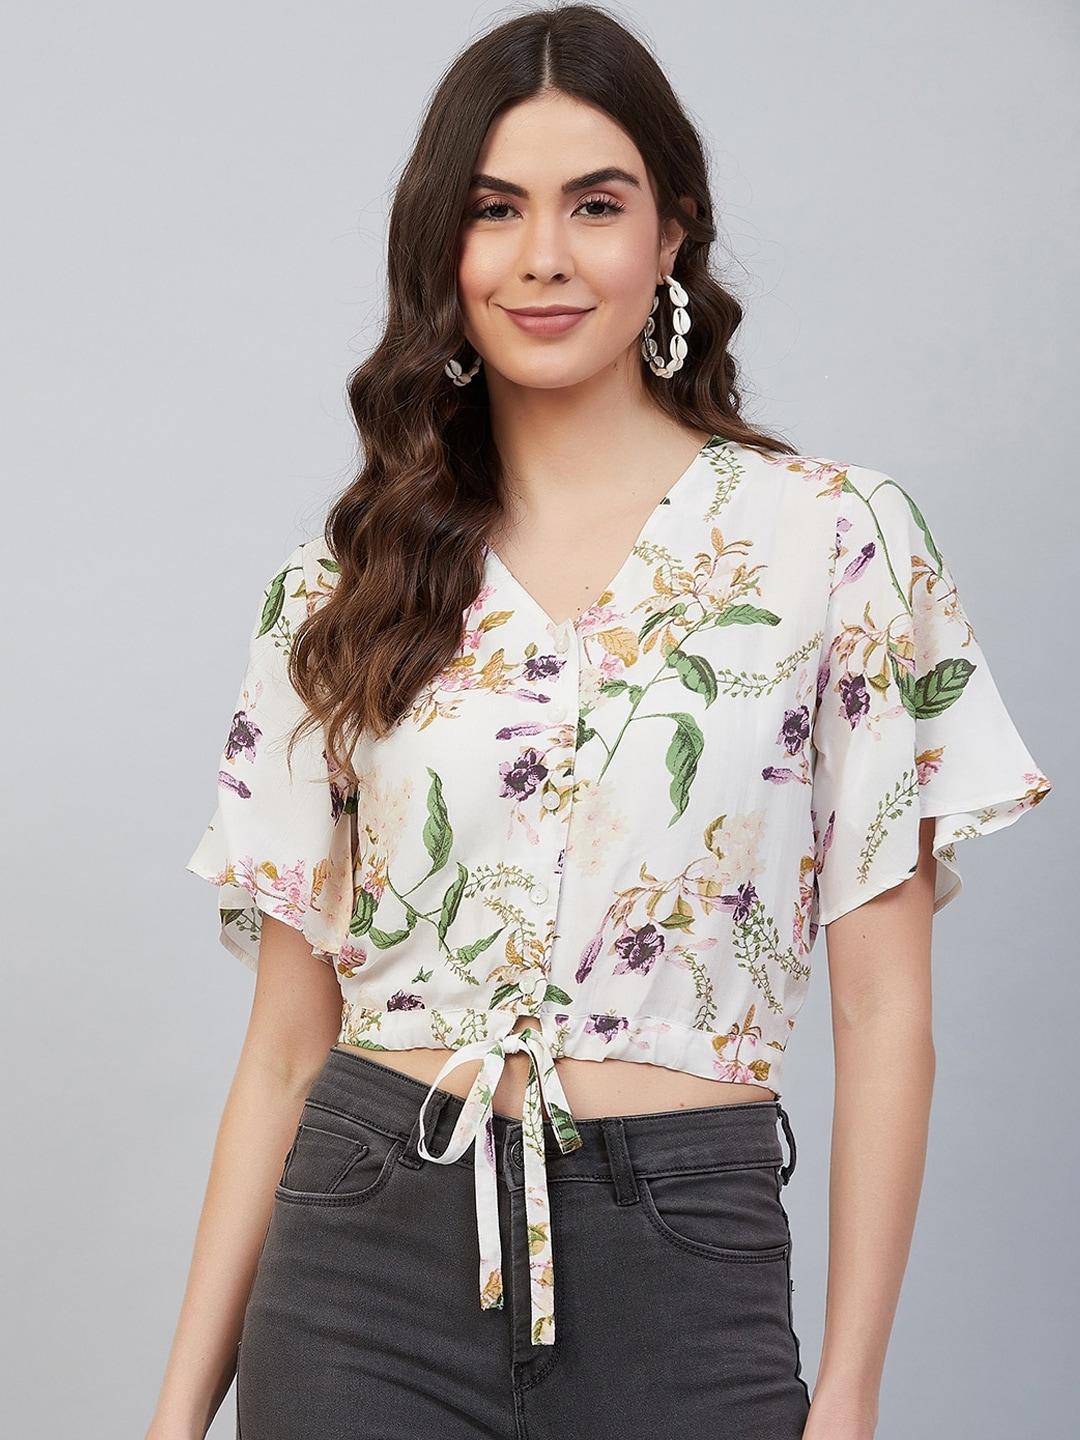 marie-claire-multicoloured-floral-printed-wrap-crop-top